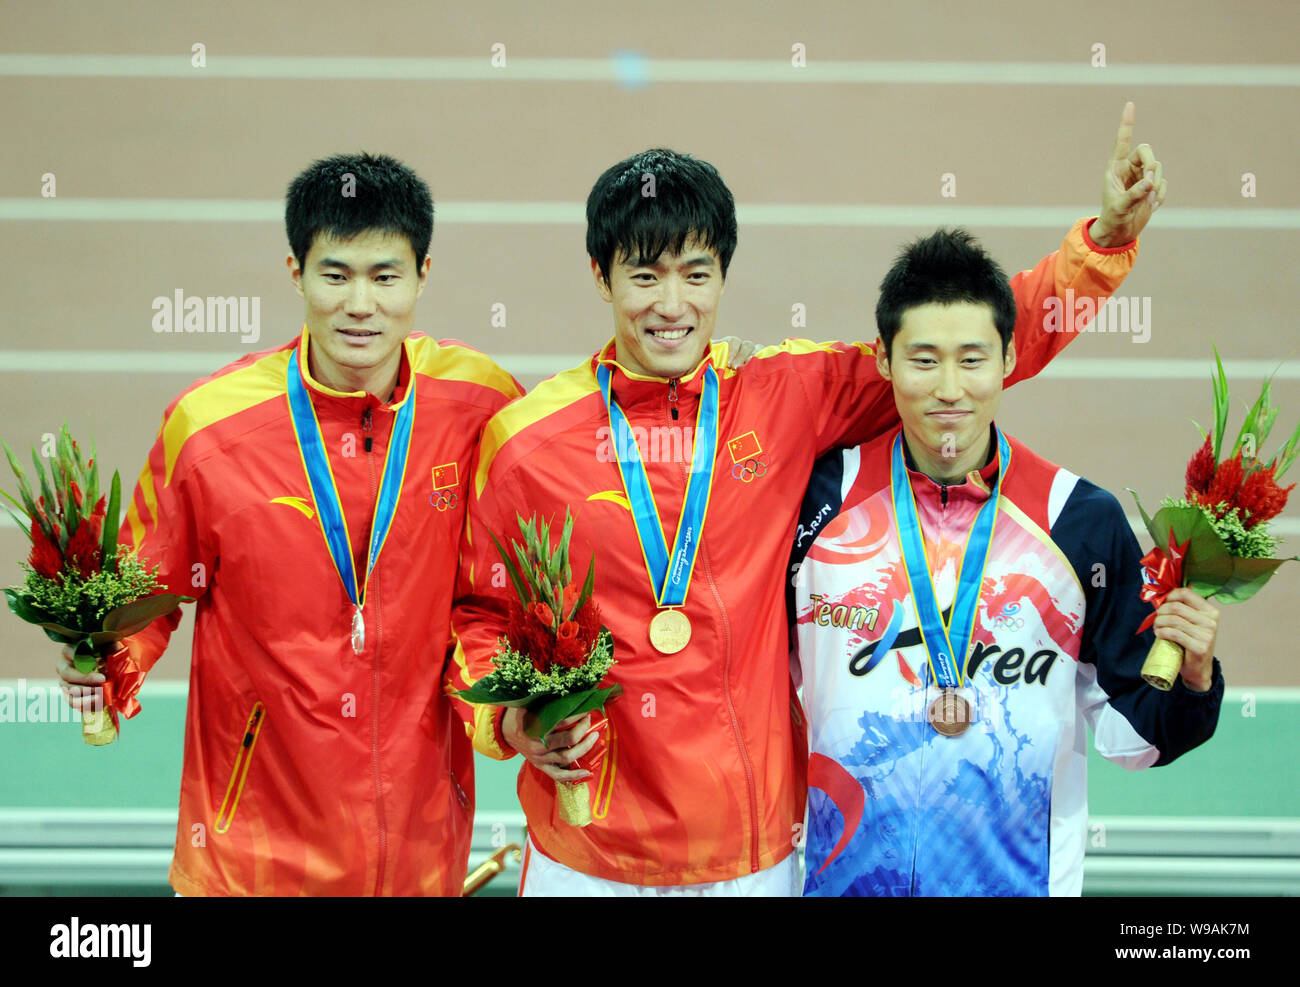 (From left) Silver medalist Shi Dongpeng of China, gold medalist Liu Xiang of China and bronze medalist Park Taekyong of South Korea pose on the podiu Stock Photo